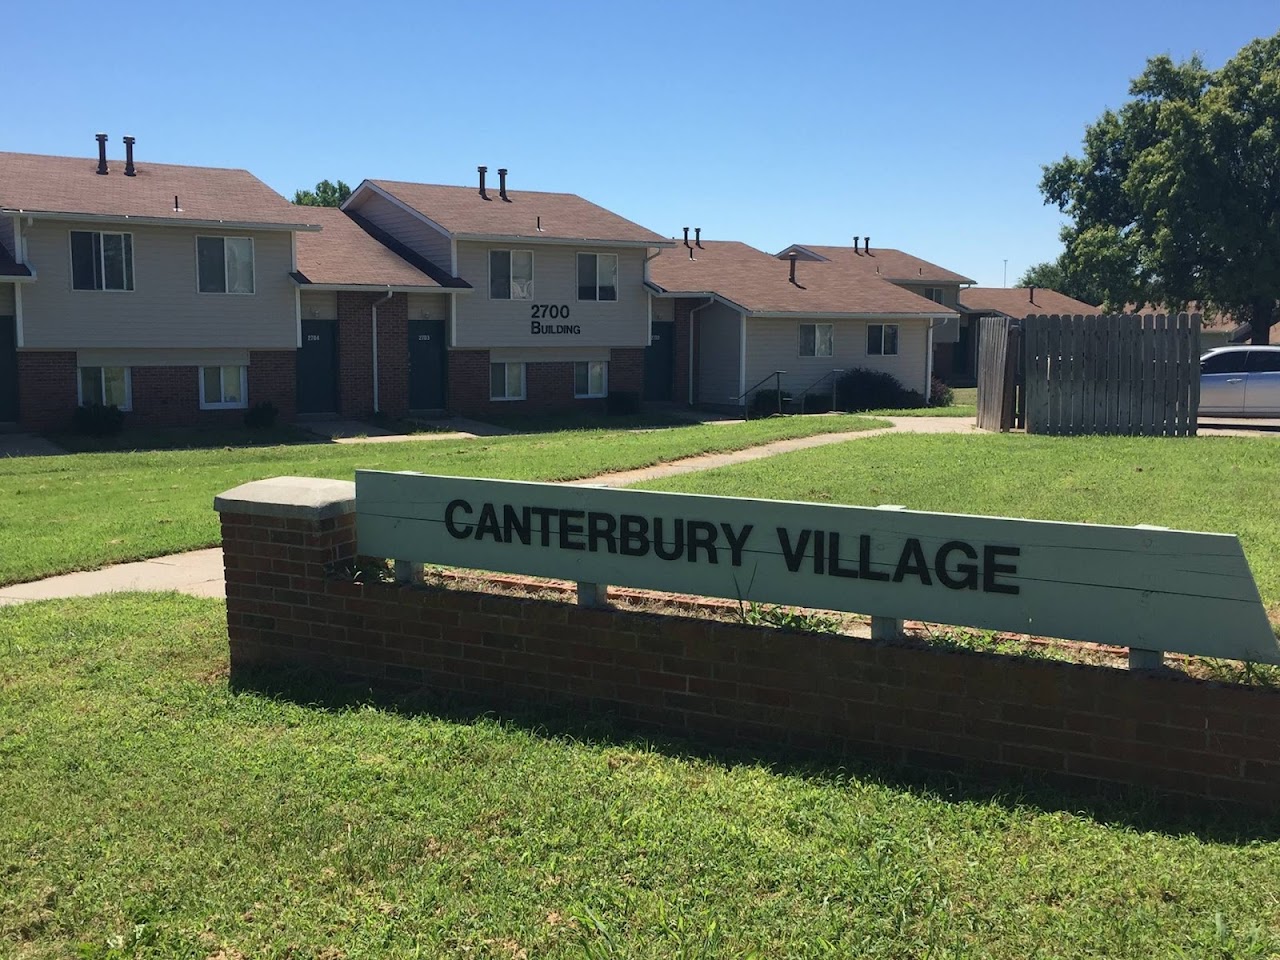 Photo of CANTERBURY VILLAGE. Affordable housing located at 2300 ST JAMES CT WINFIELD, KS 67156